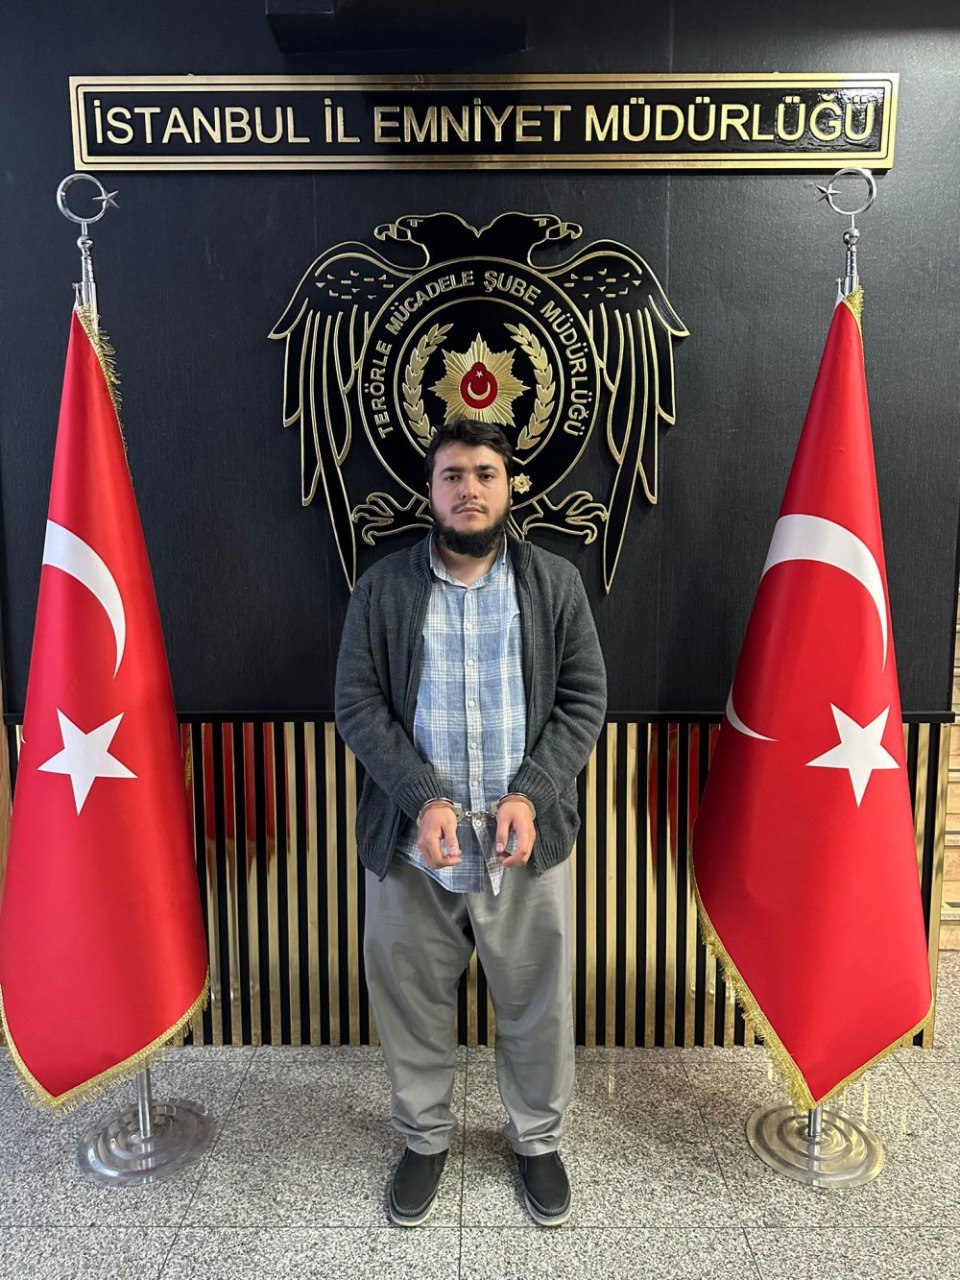 (Photos / Video) Turkish Intelligence Officers Arrested Twelve Suspected Islamic State (IS) Militants in Istanbul, Konya and Antalya, Turkey - 24 May 2023